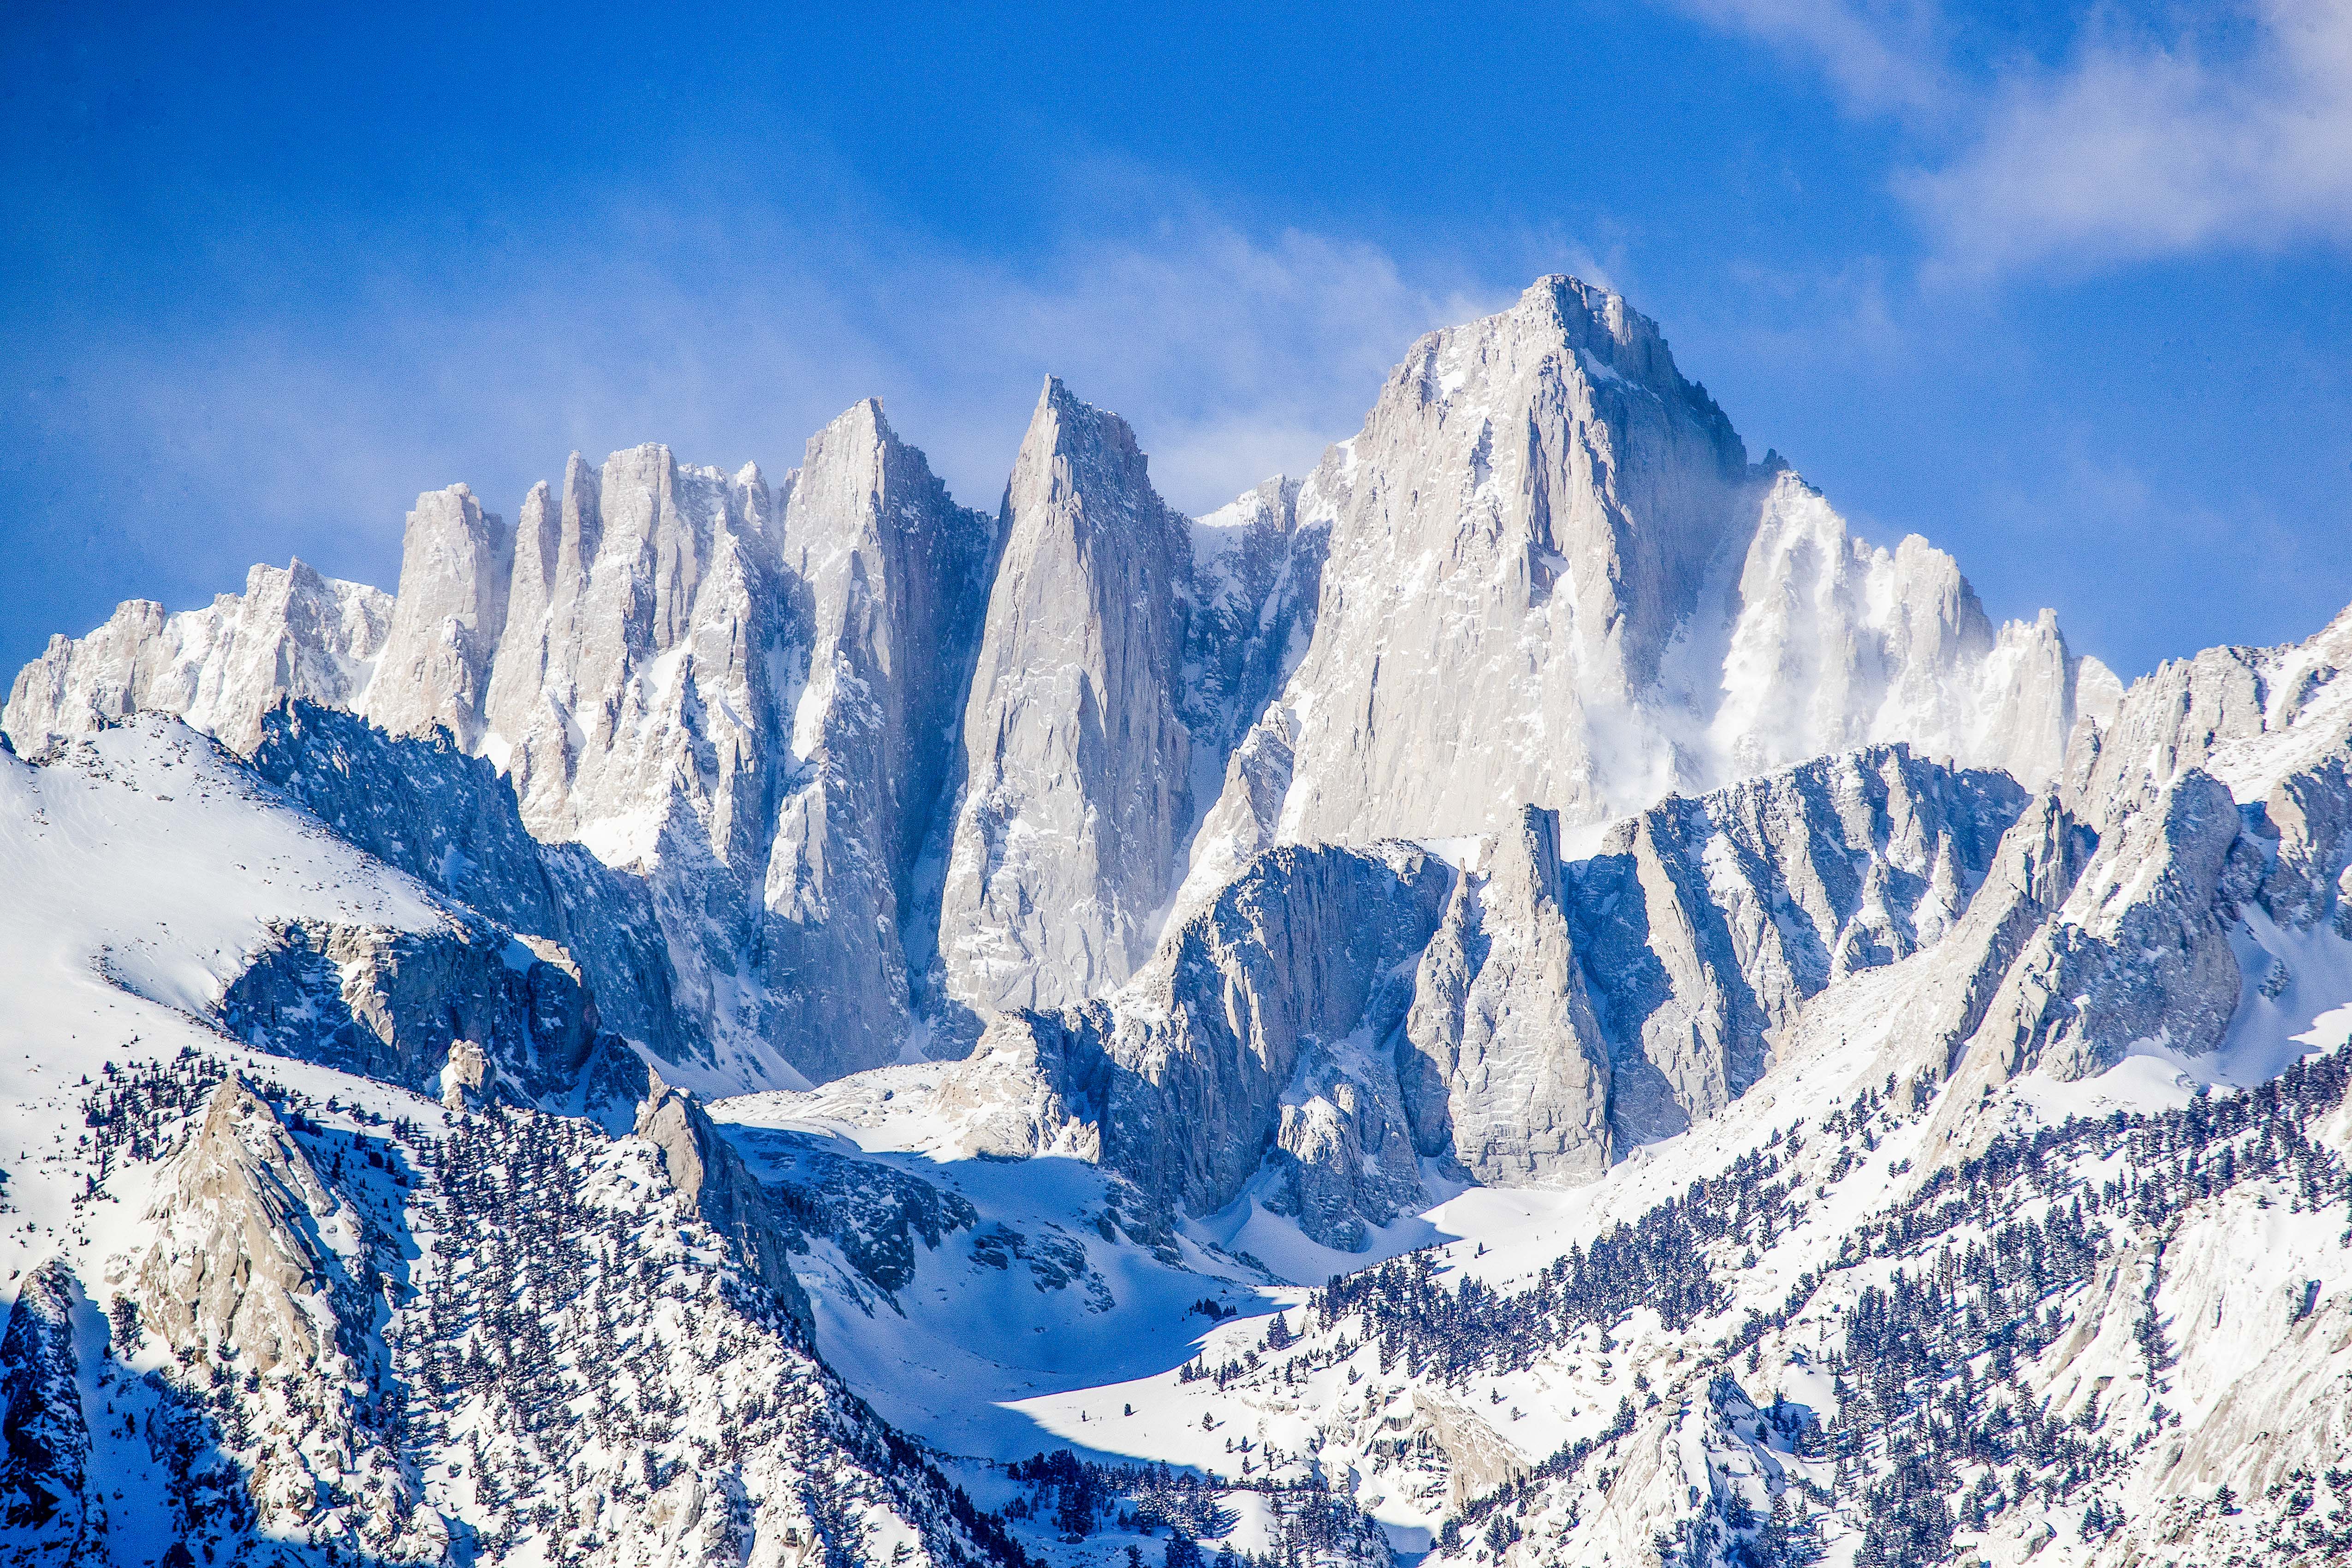 2 climbers found dead after summiting Mt. Whitney via treacherous route